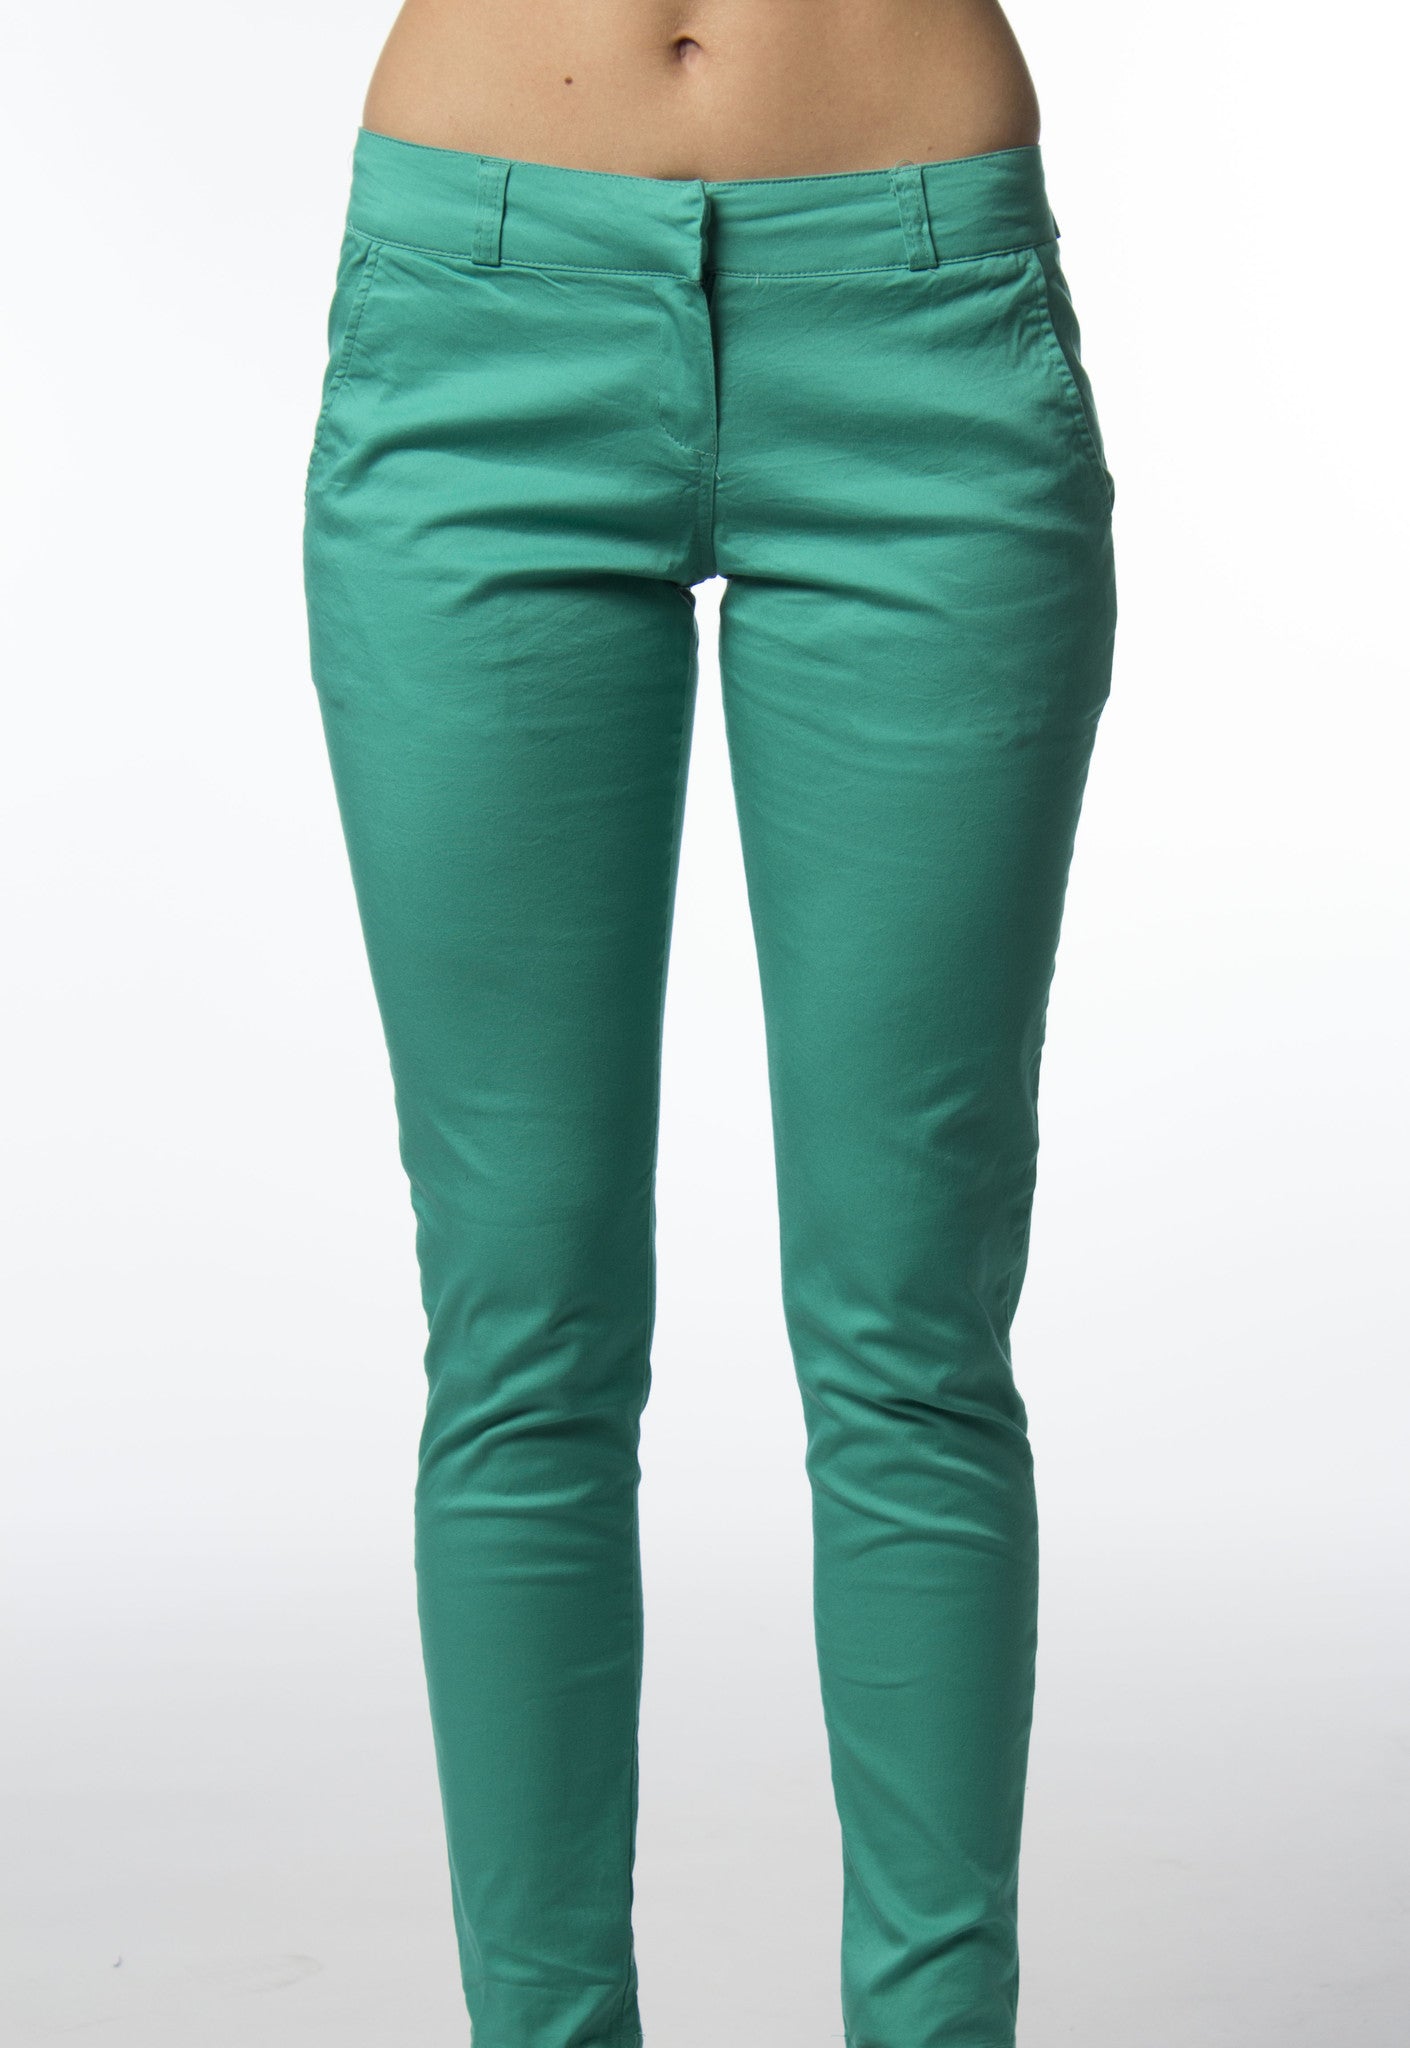 Trendy Green Cotton Skinny Pants with Flap-Back Pockets | Womens ...